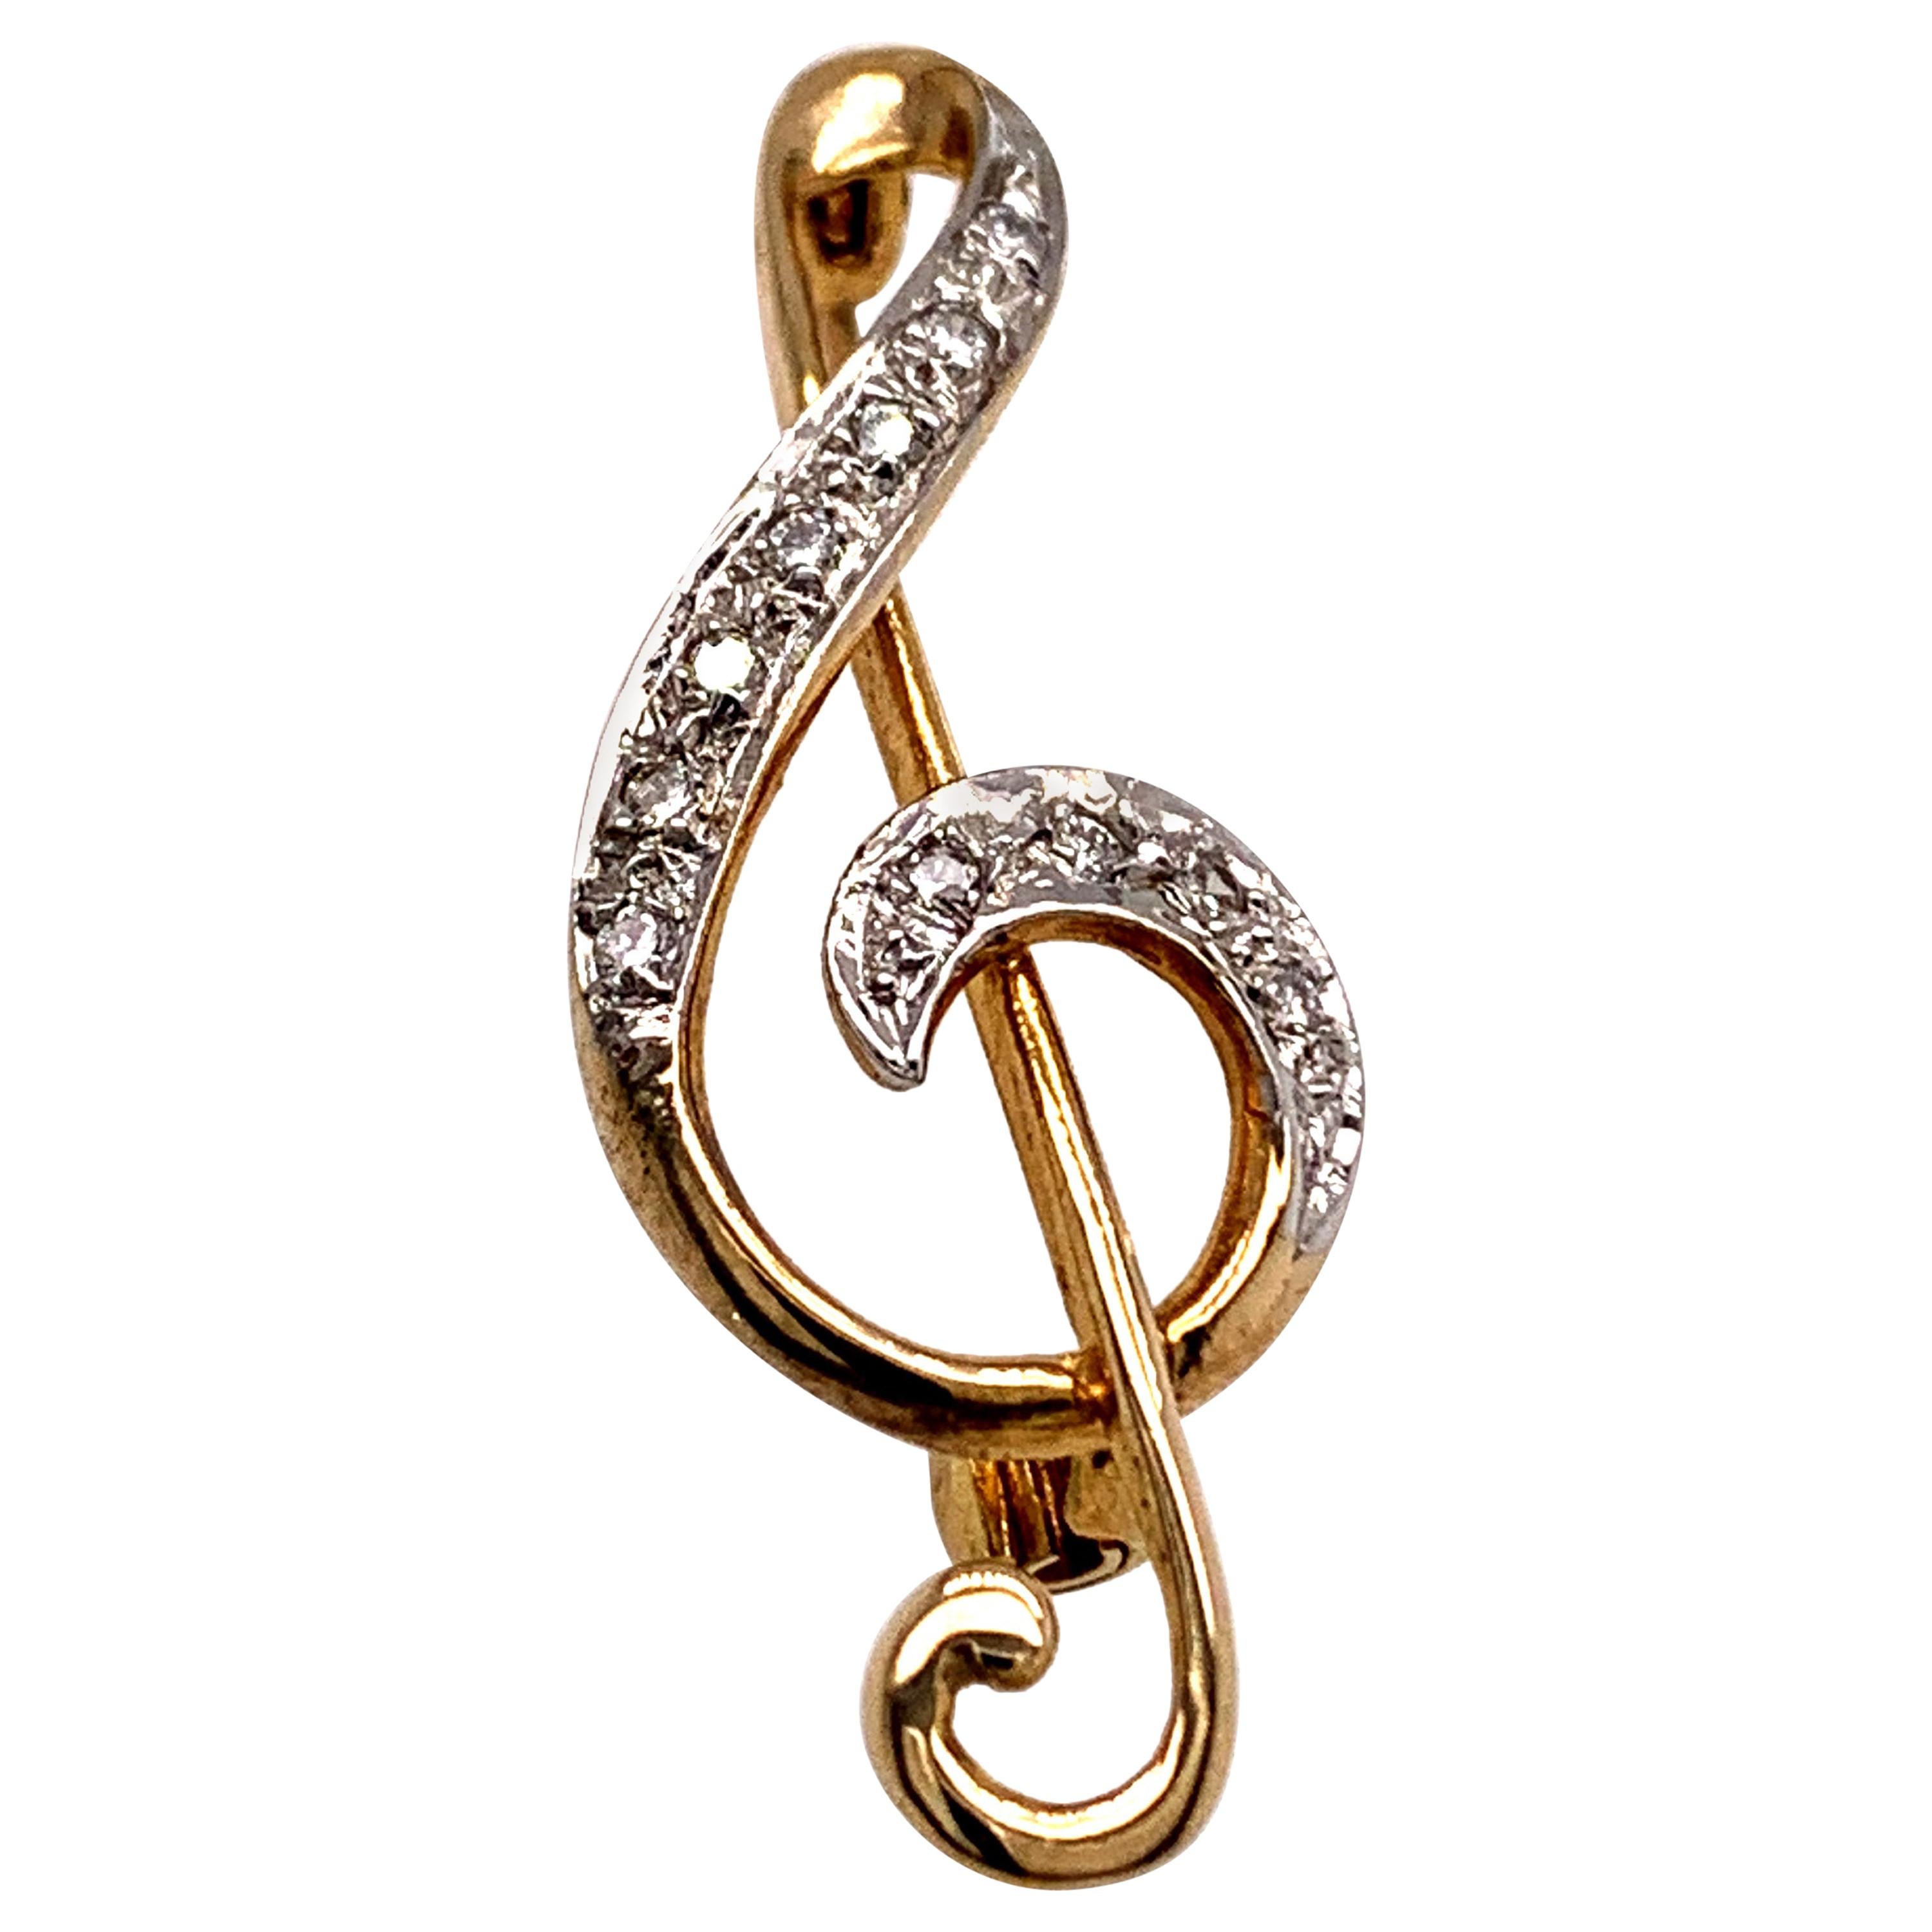 Antique Gold and Diamond Musical Clef Pin For Sale